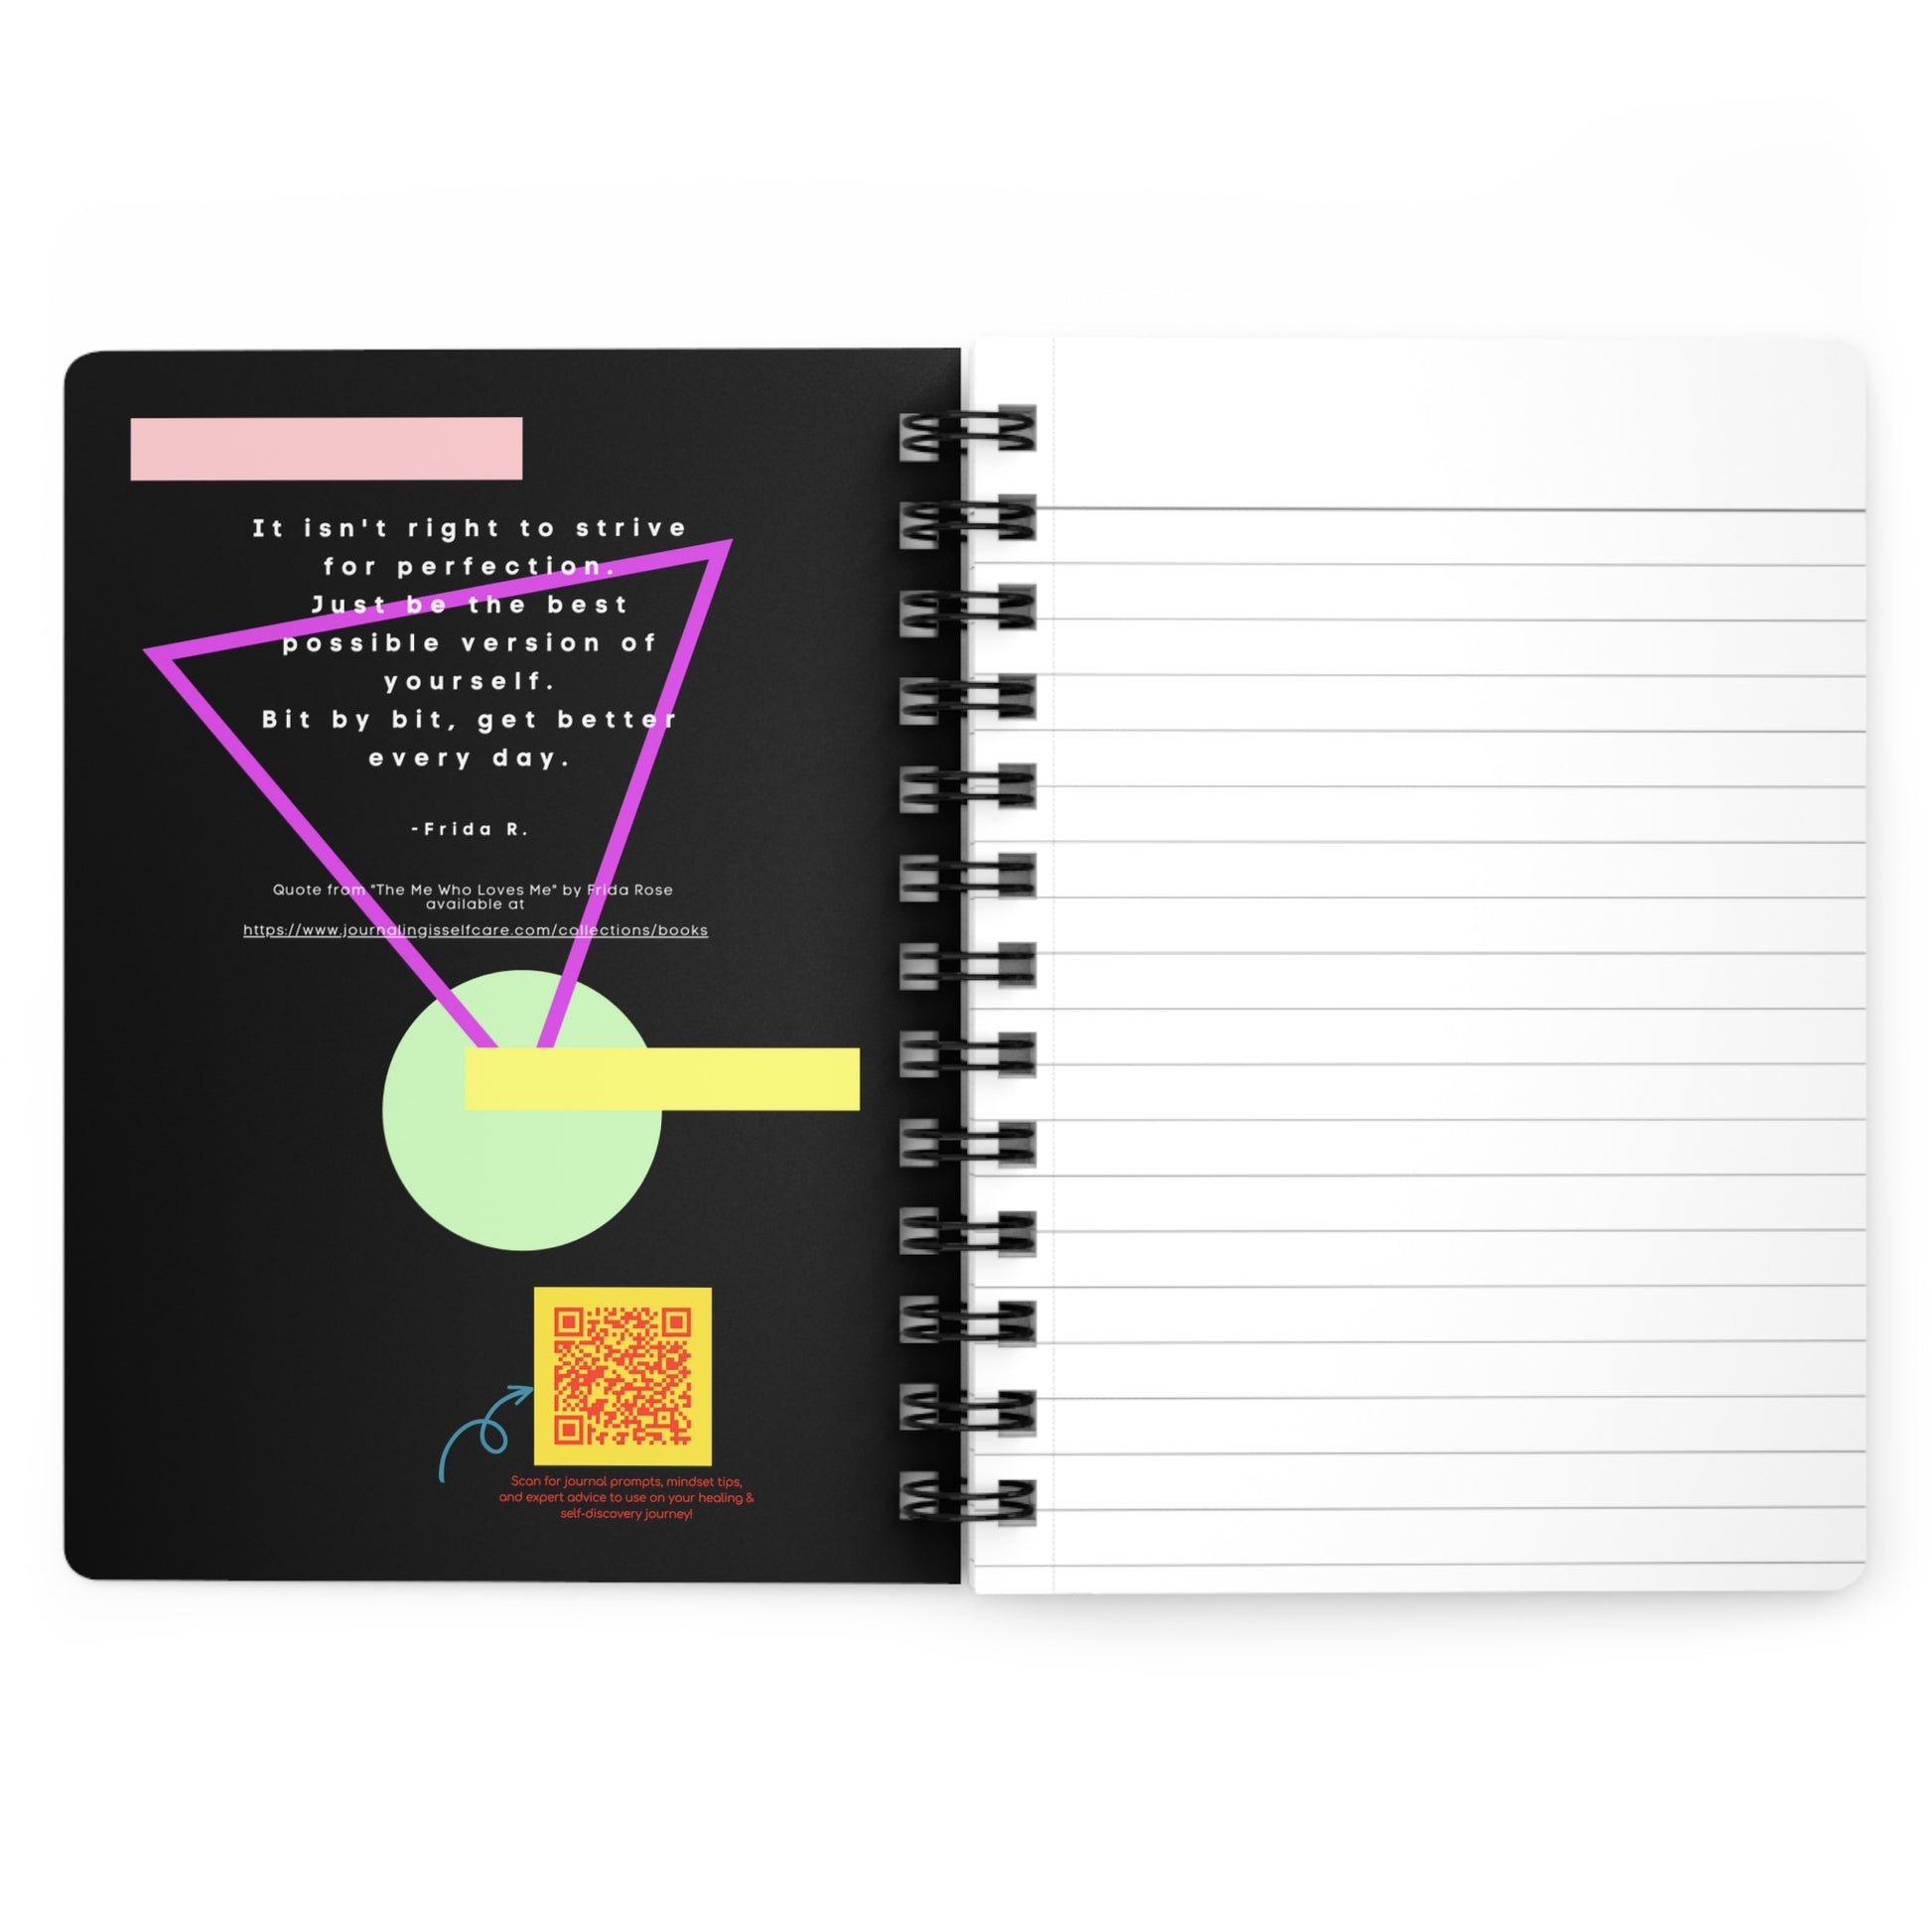 A "Manifesting My Blessings" Daily Affirmation Journal adorned with a triangle image and a qr code for the law of attraction.